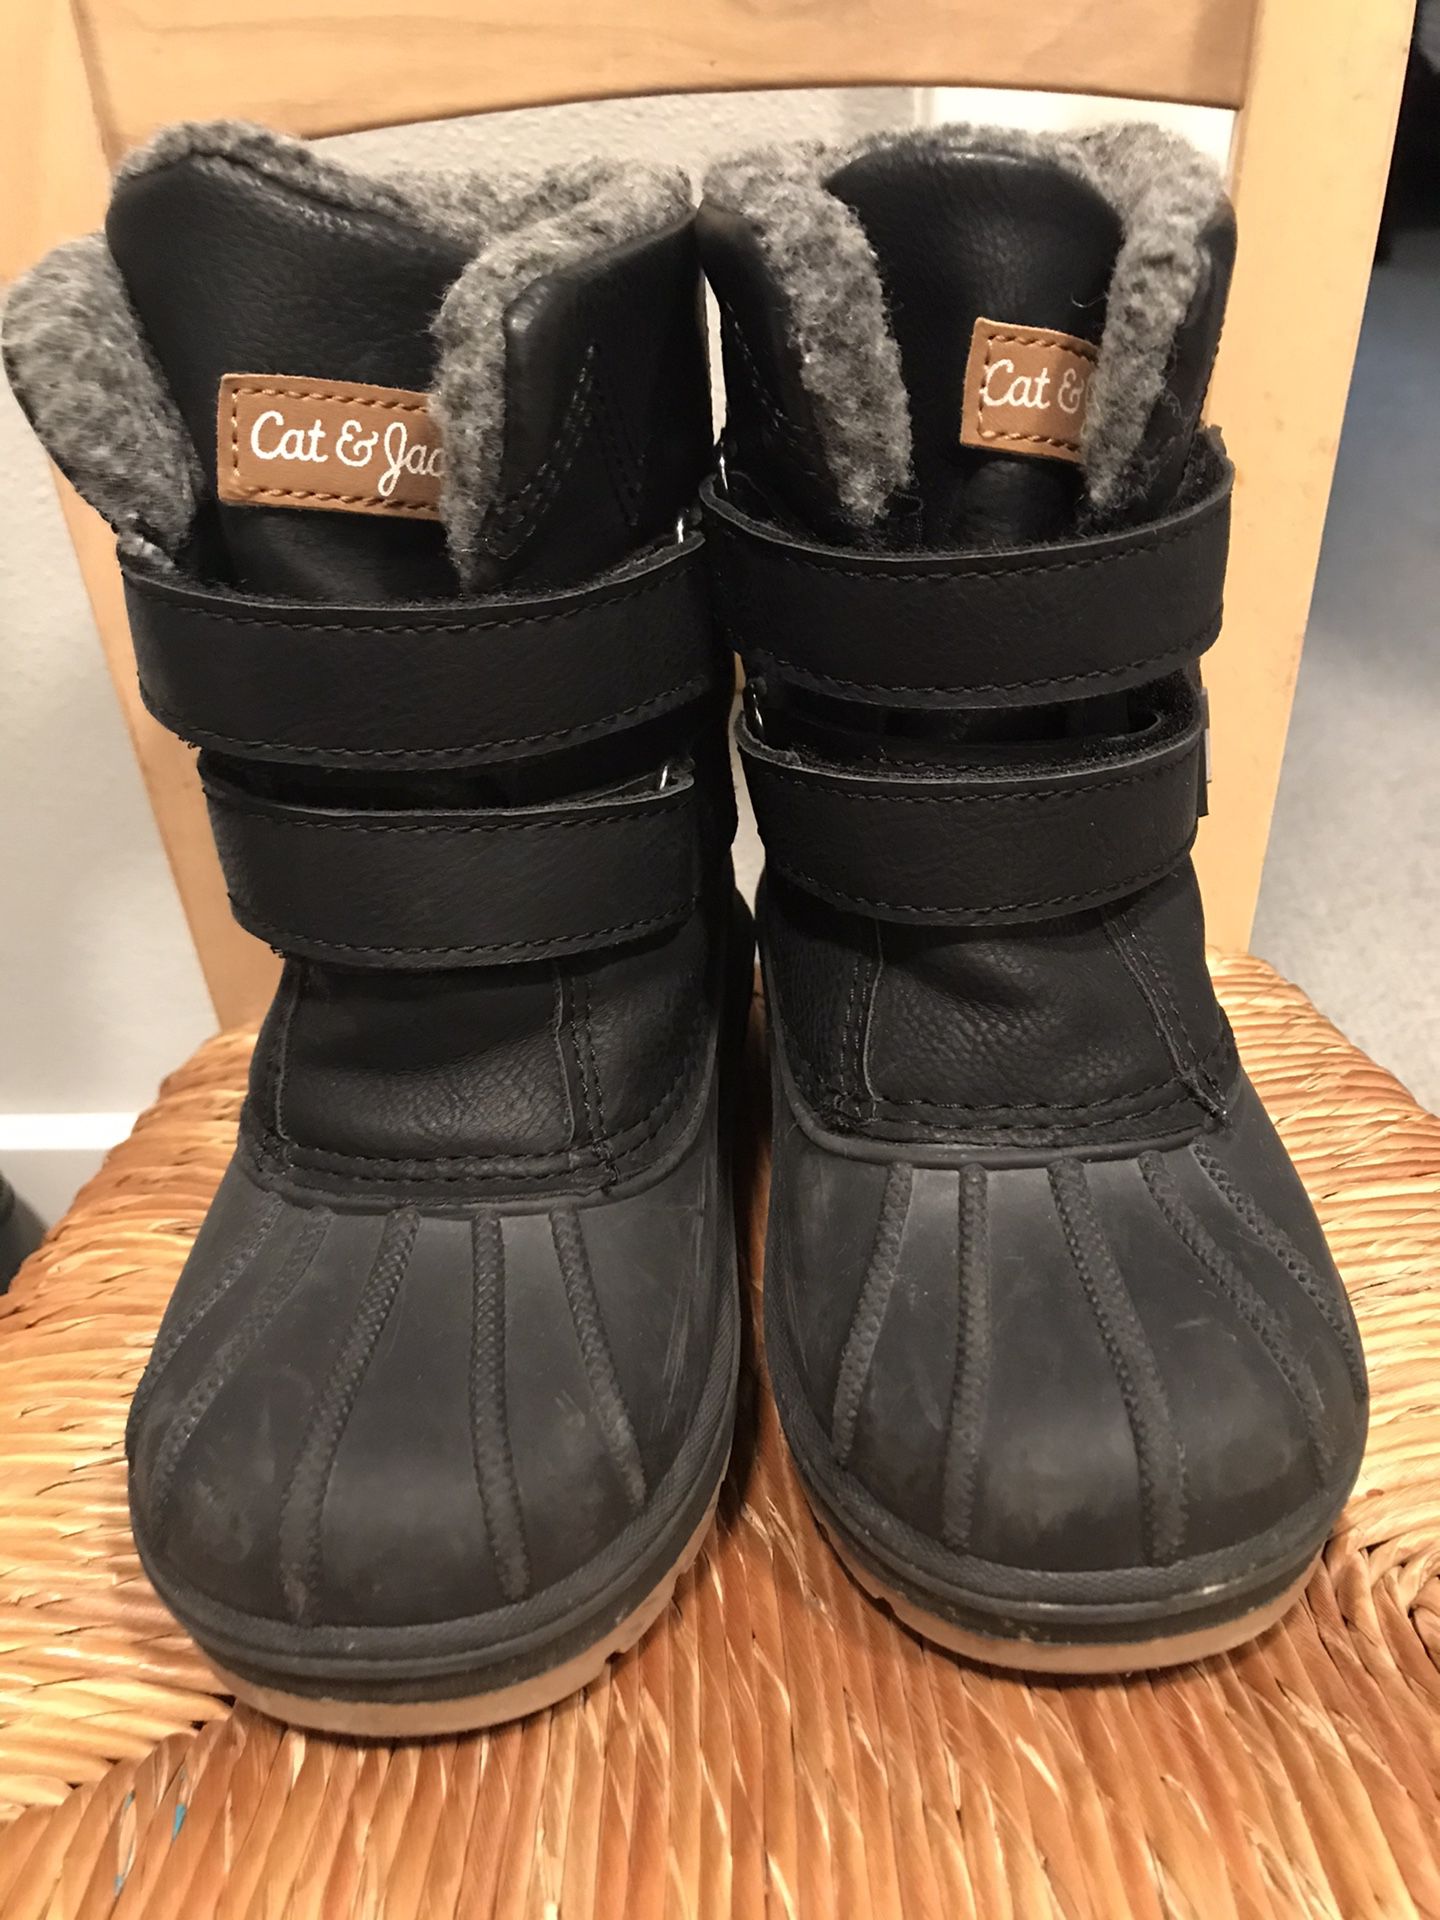 Toddlers Cat & Jack snow boots